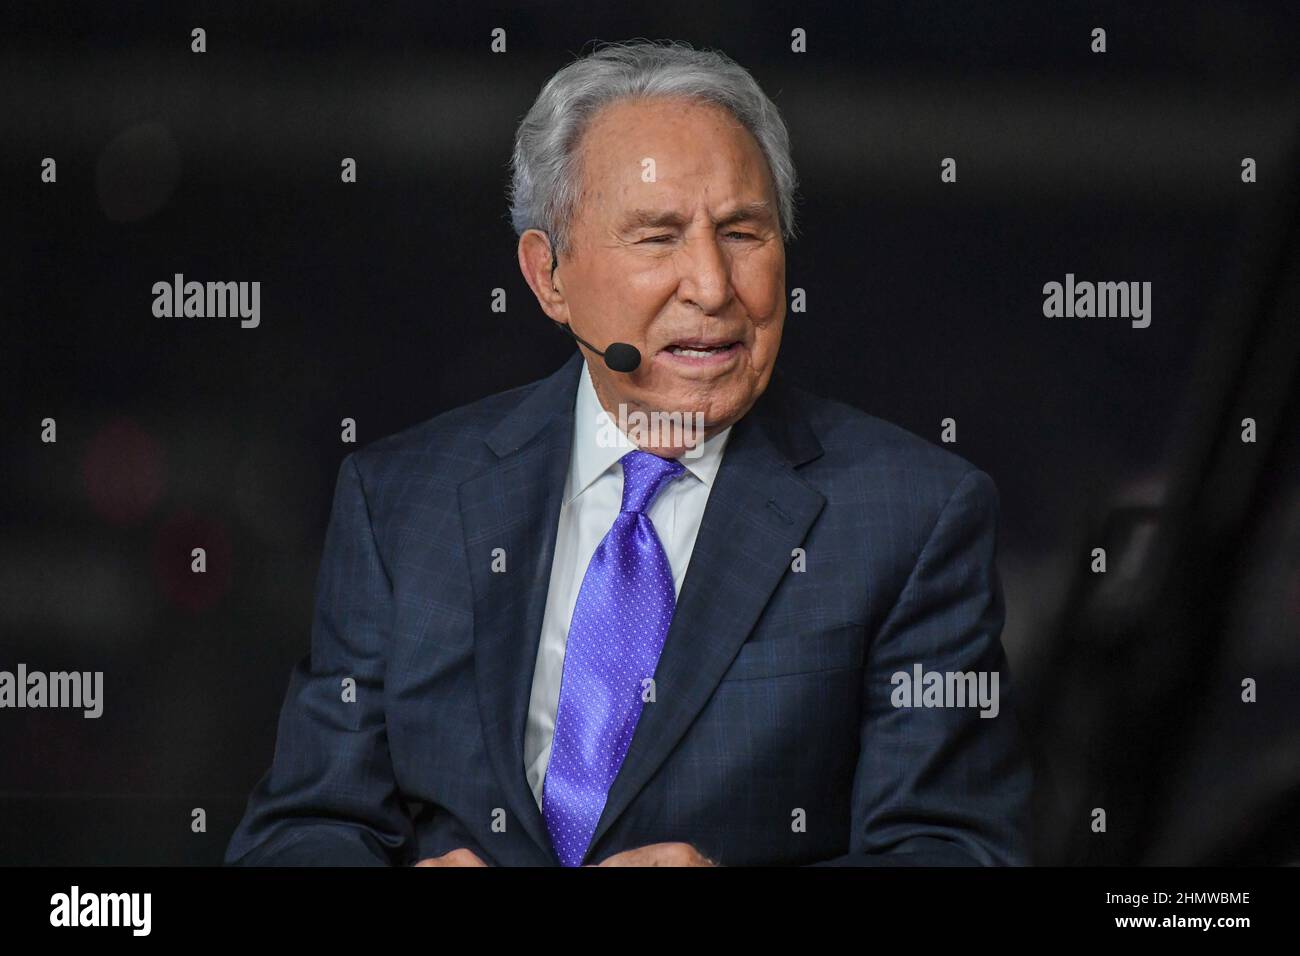 ESPN analyst Lee Corso before the College Football National Championship game between Alabama Crimson Tide and Georgia Bulldogs, Monday, Jan. 10, 2022 Stock Photo